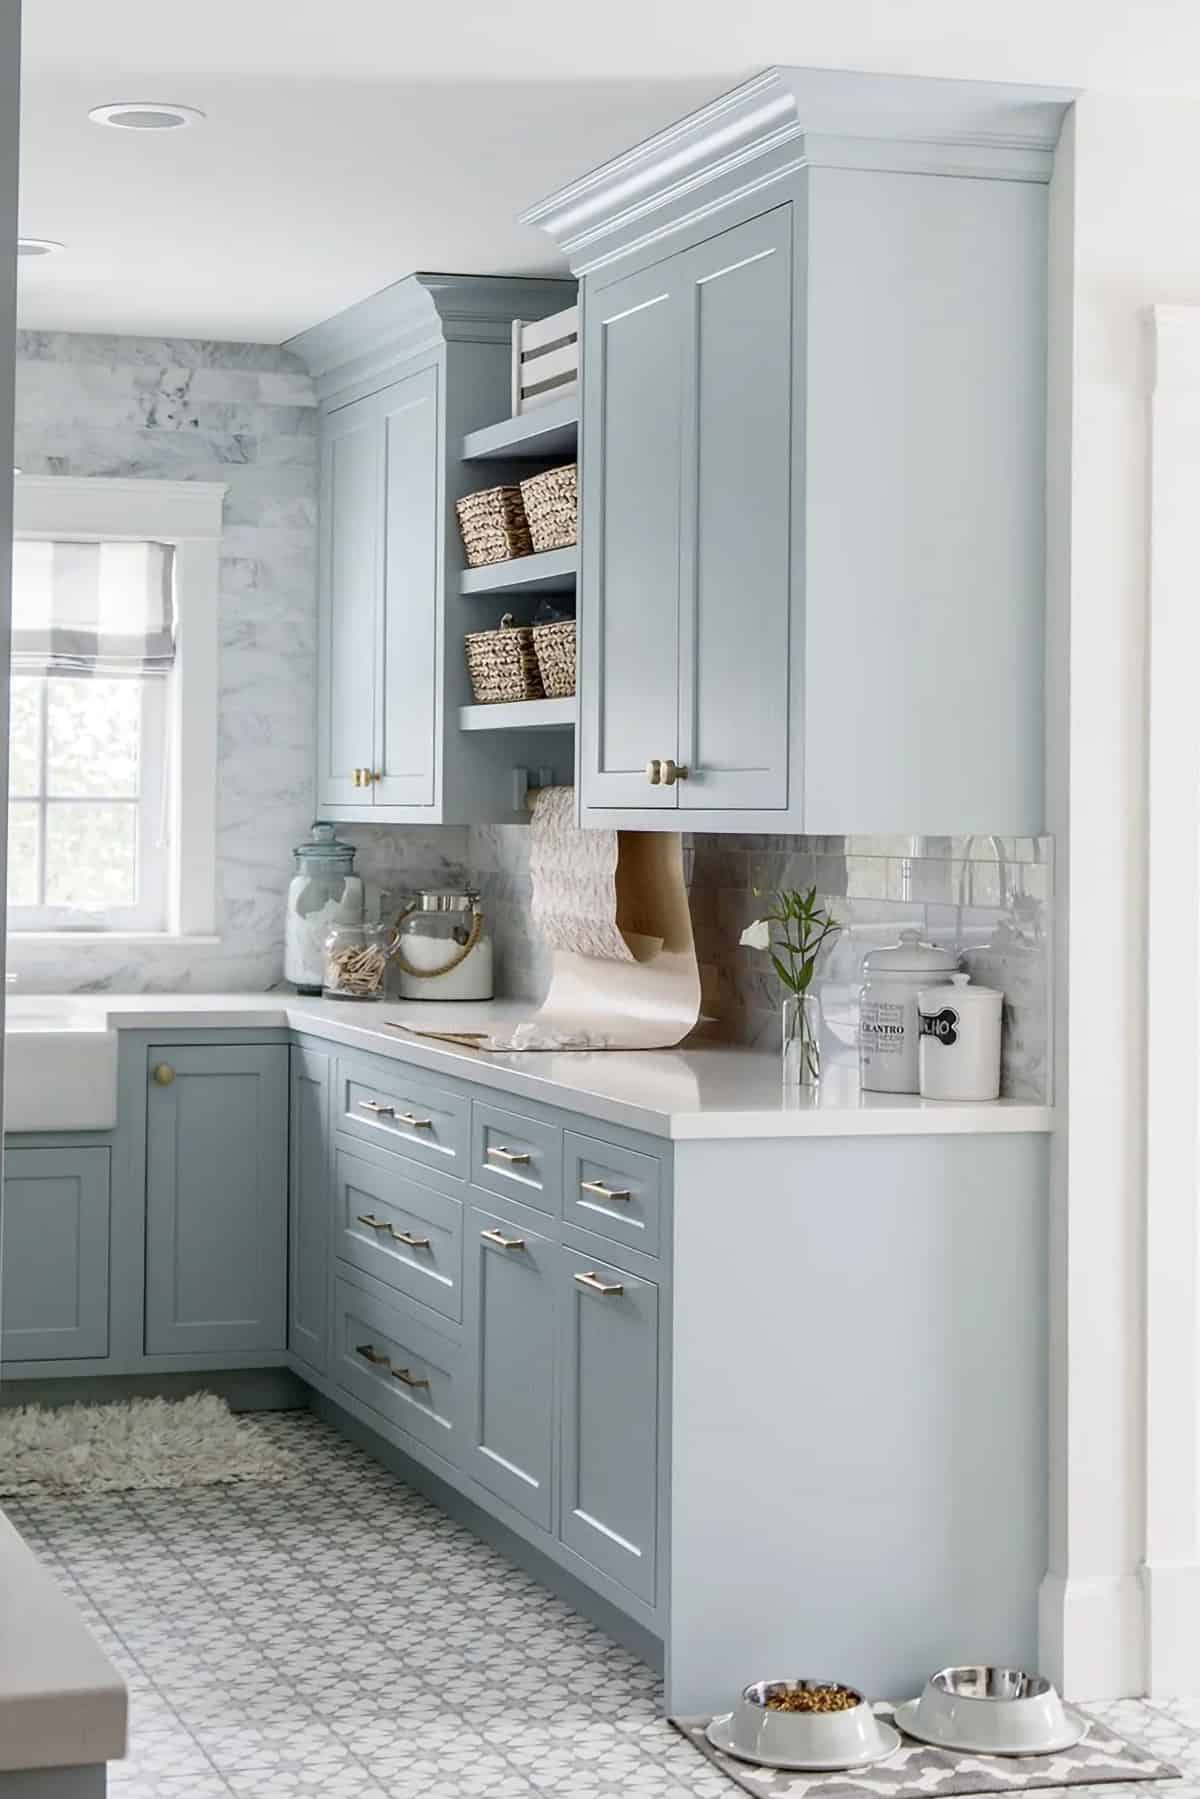 Kitchen design with cabinets painted in Benjamin Moore Blue Smoke with chrome pulls. Gray & white marble backsplash, white countertops and gray & white patterned flooring.